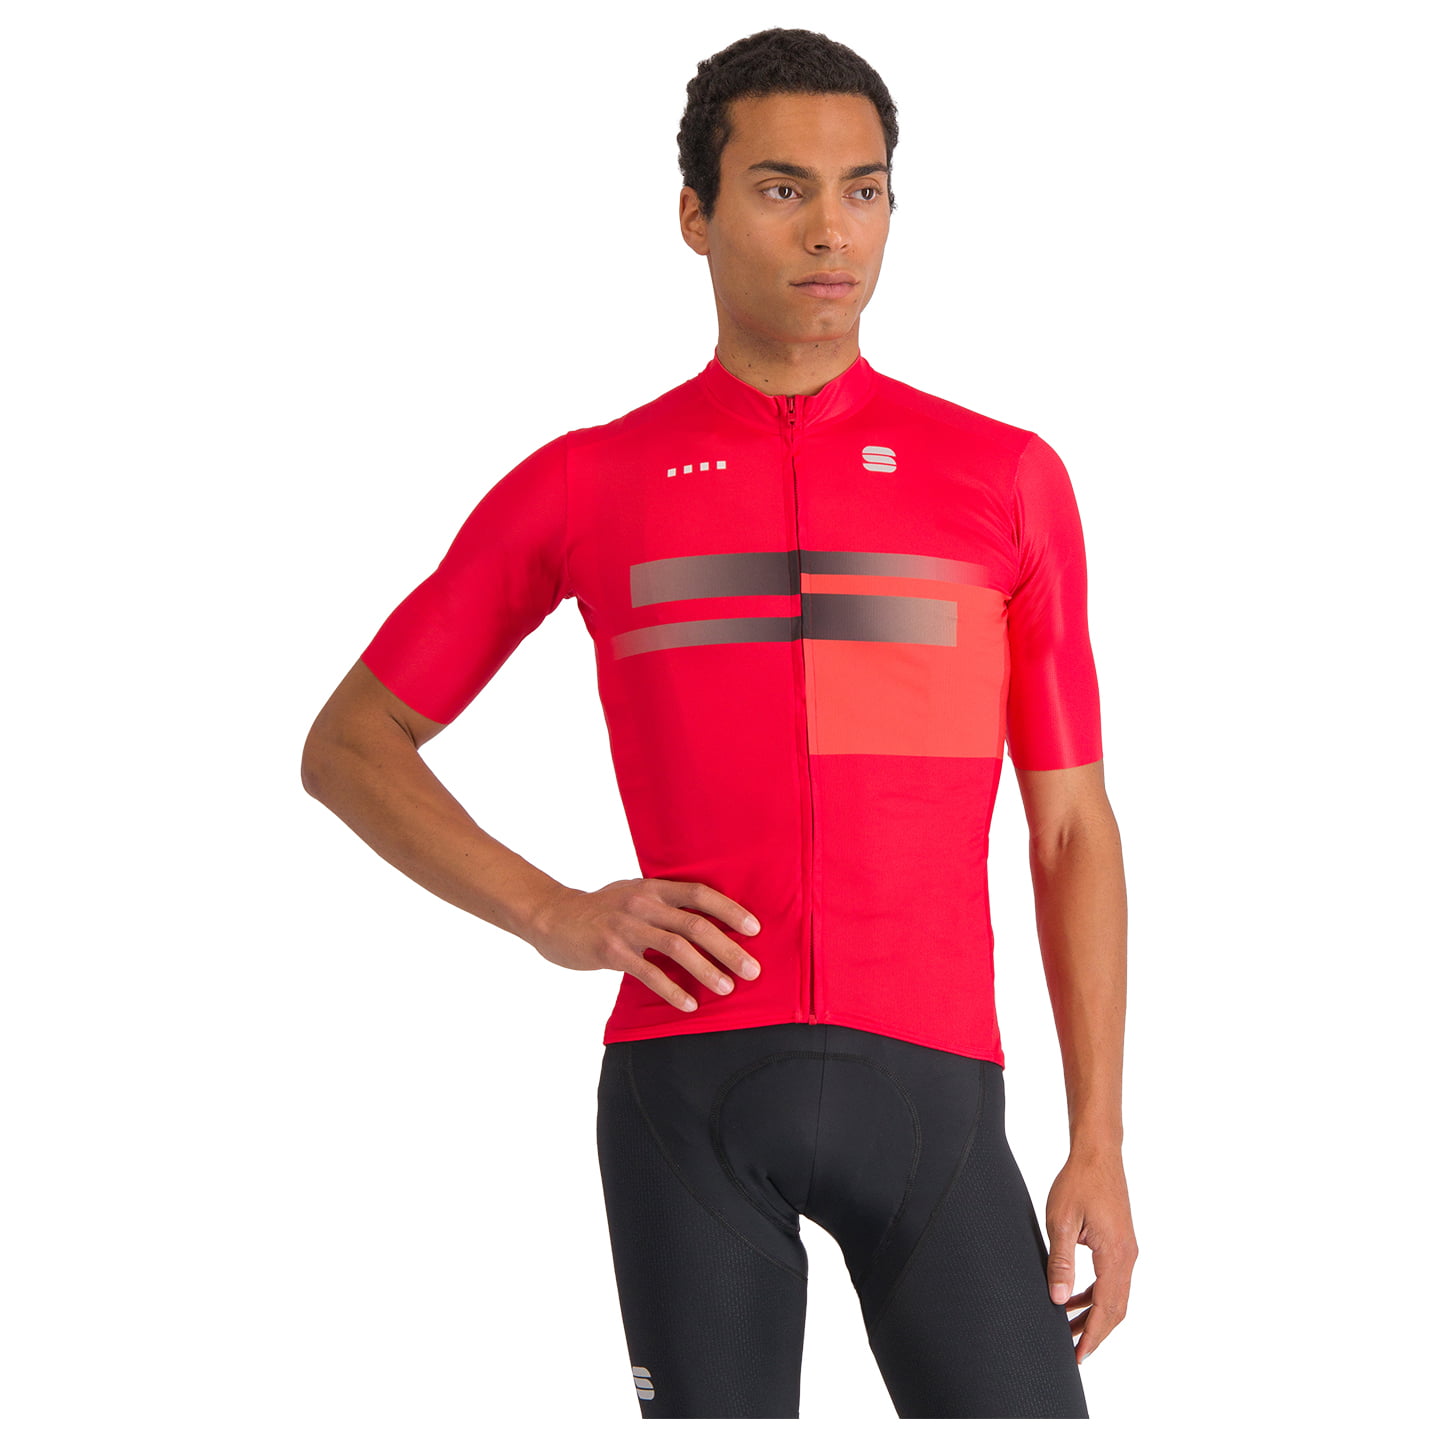 SPORTFUL Gruppetto Short Sleeve Jersey, for men, size 2XL, Cycling jersey, Cycle clothing